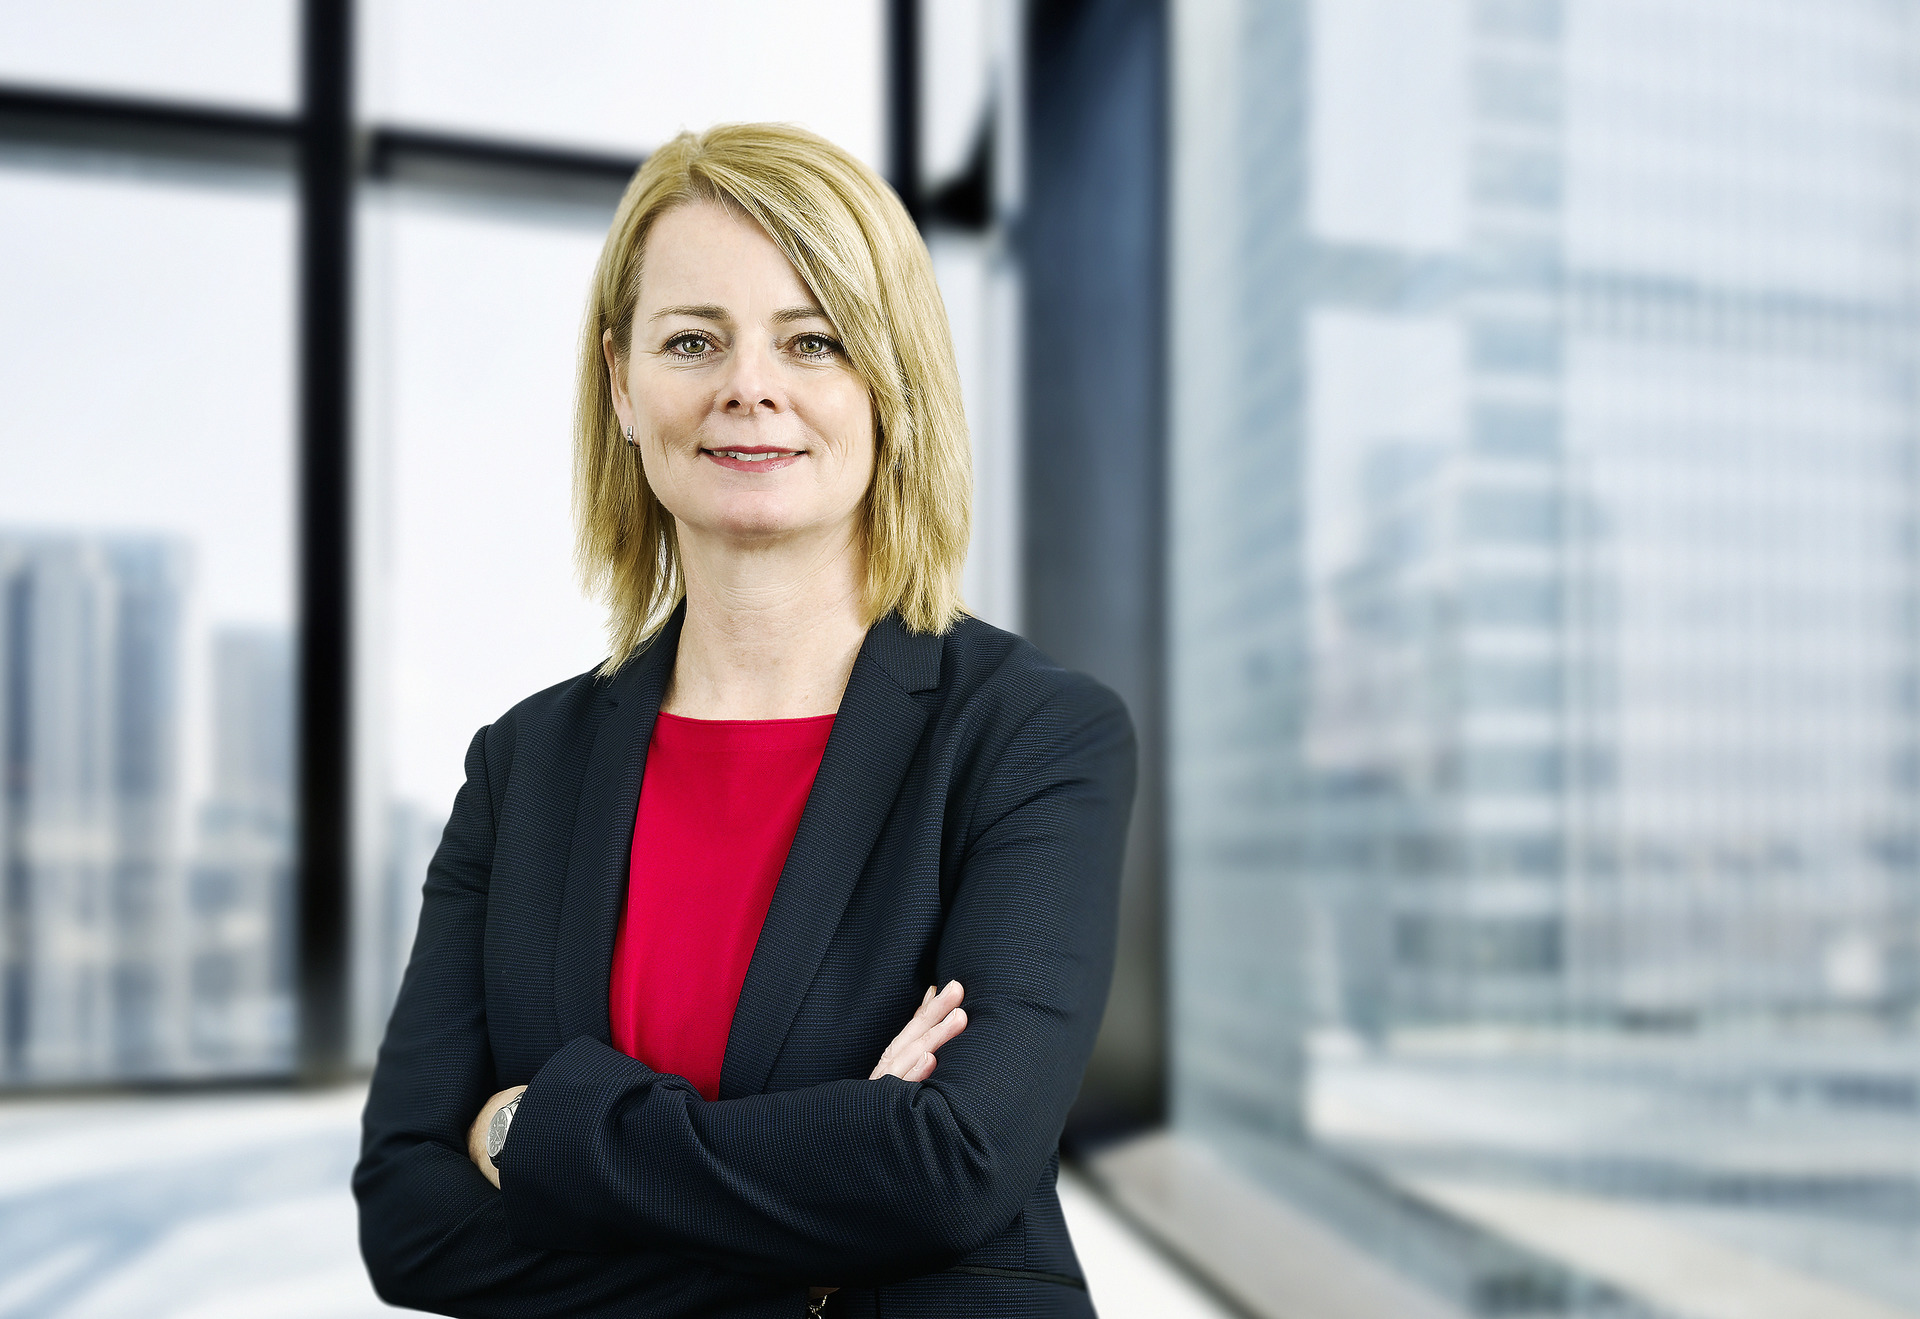 Frederique van Baarle to head LANXESS High Performance Materials business unit